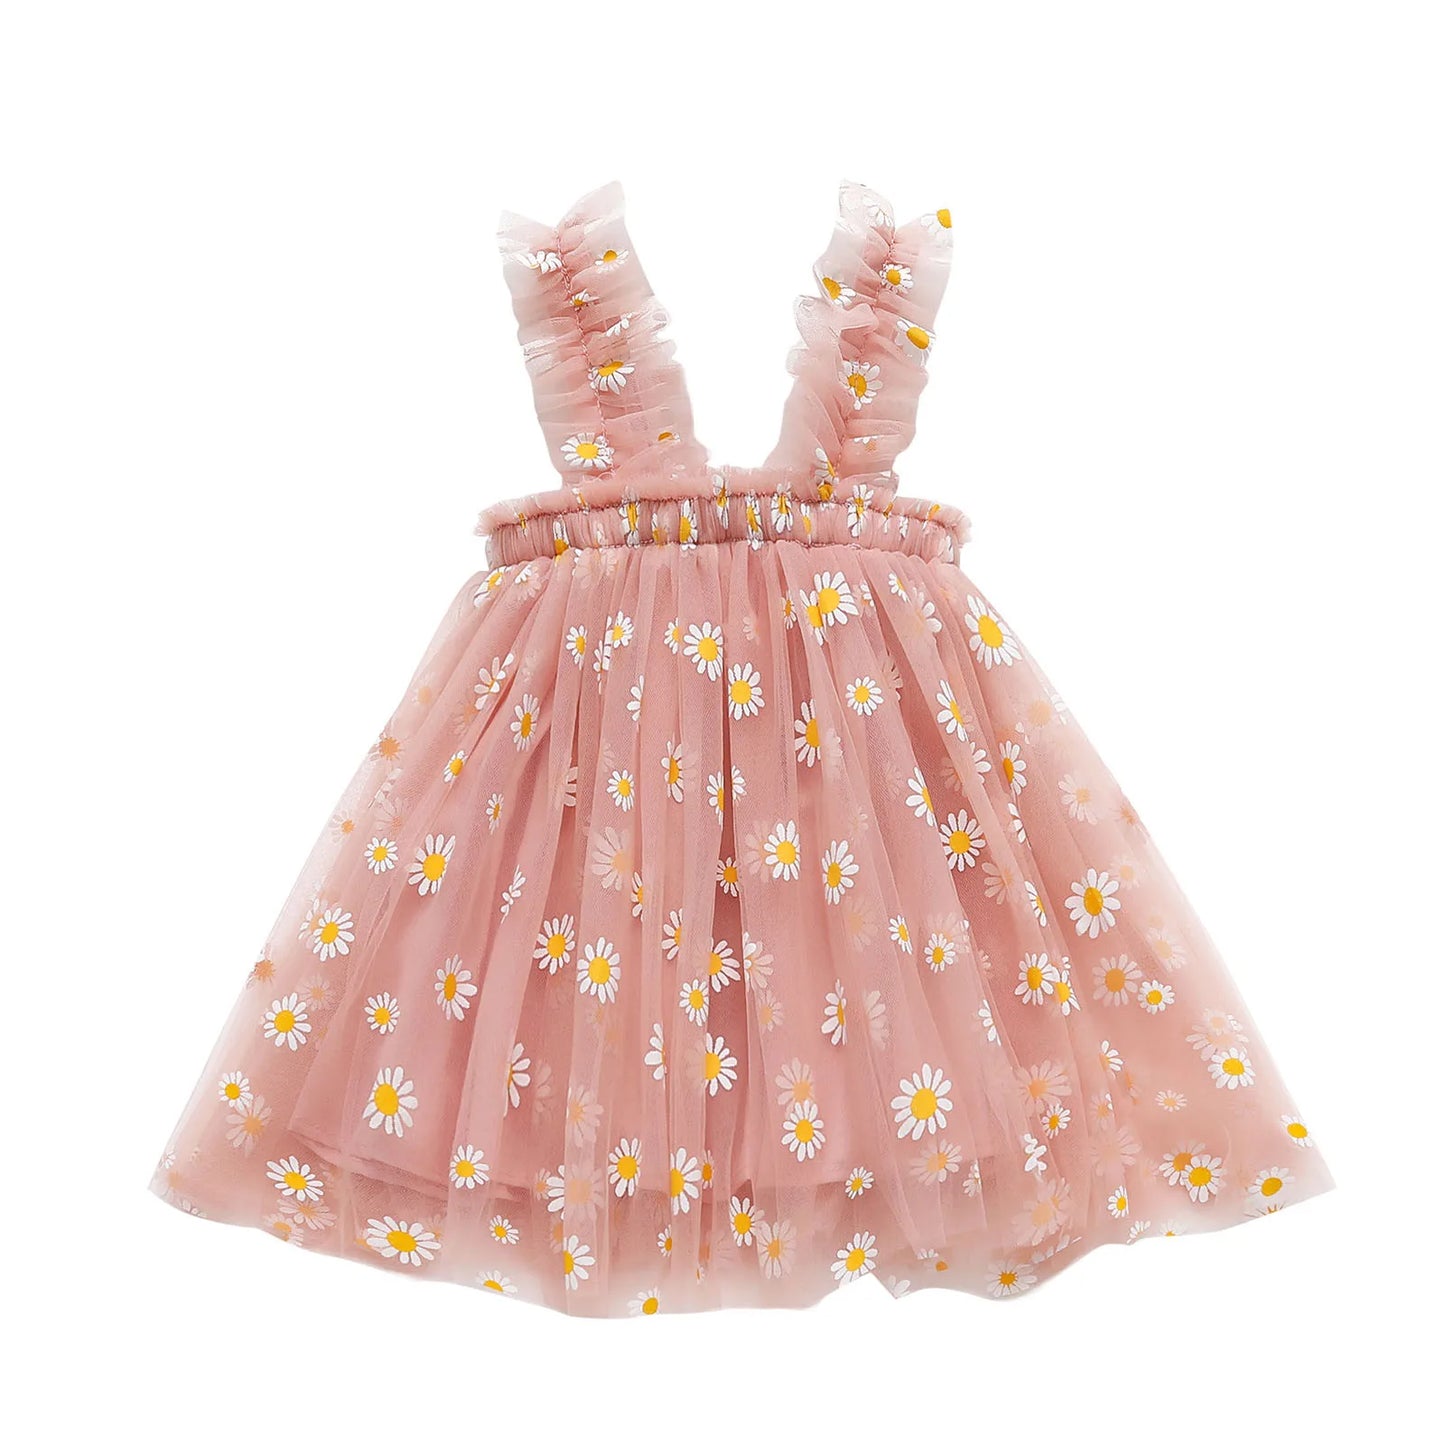 Cute Daisy Floral Baby/Toddler Dress